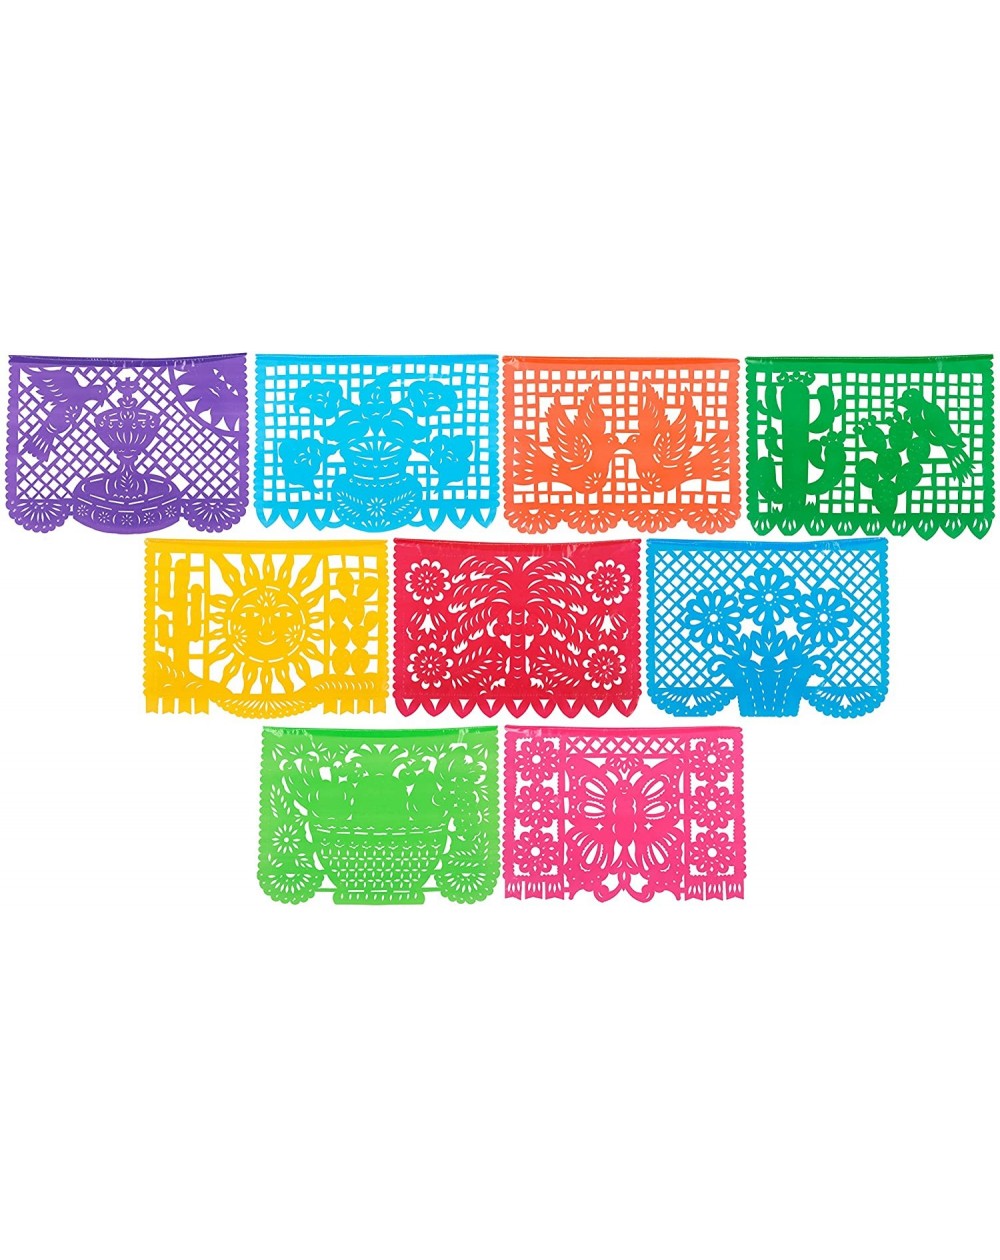 Banners Festival Mexicano Large Plastic Papel Picado Banner- 9 Multi-Colored Panels 15 feet Long - CQ12HEQBGR5 $9.17